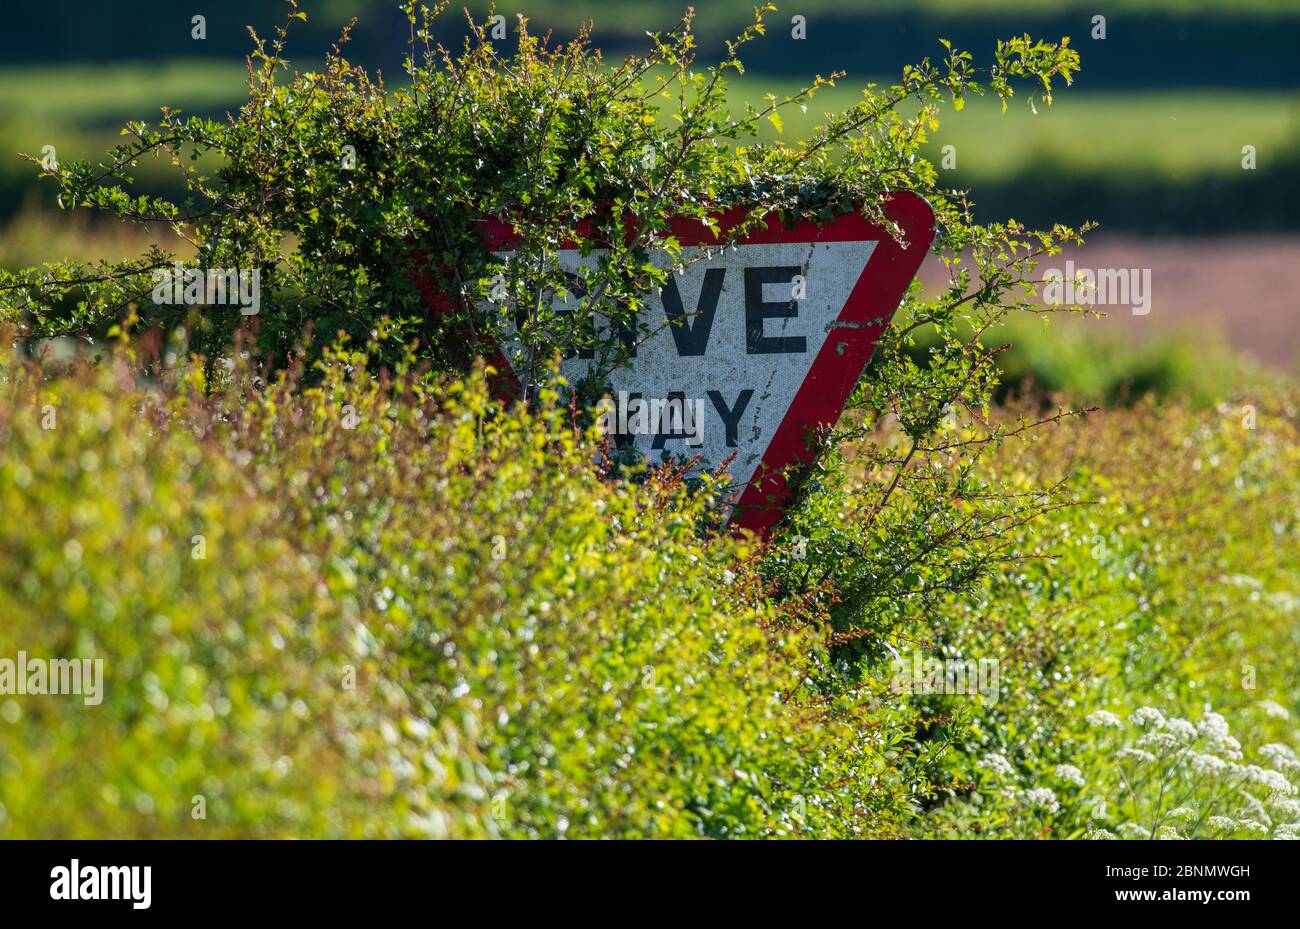 Roadside traffic warning signs covered over and obscured by trees, plants and vegetation, Shropshire, England Stock Photo